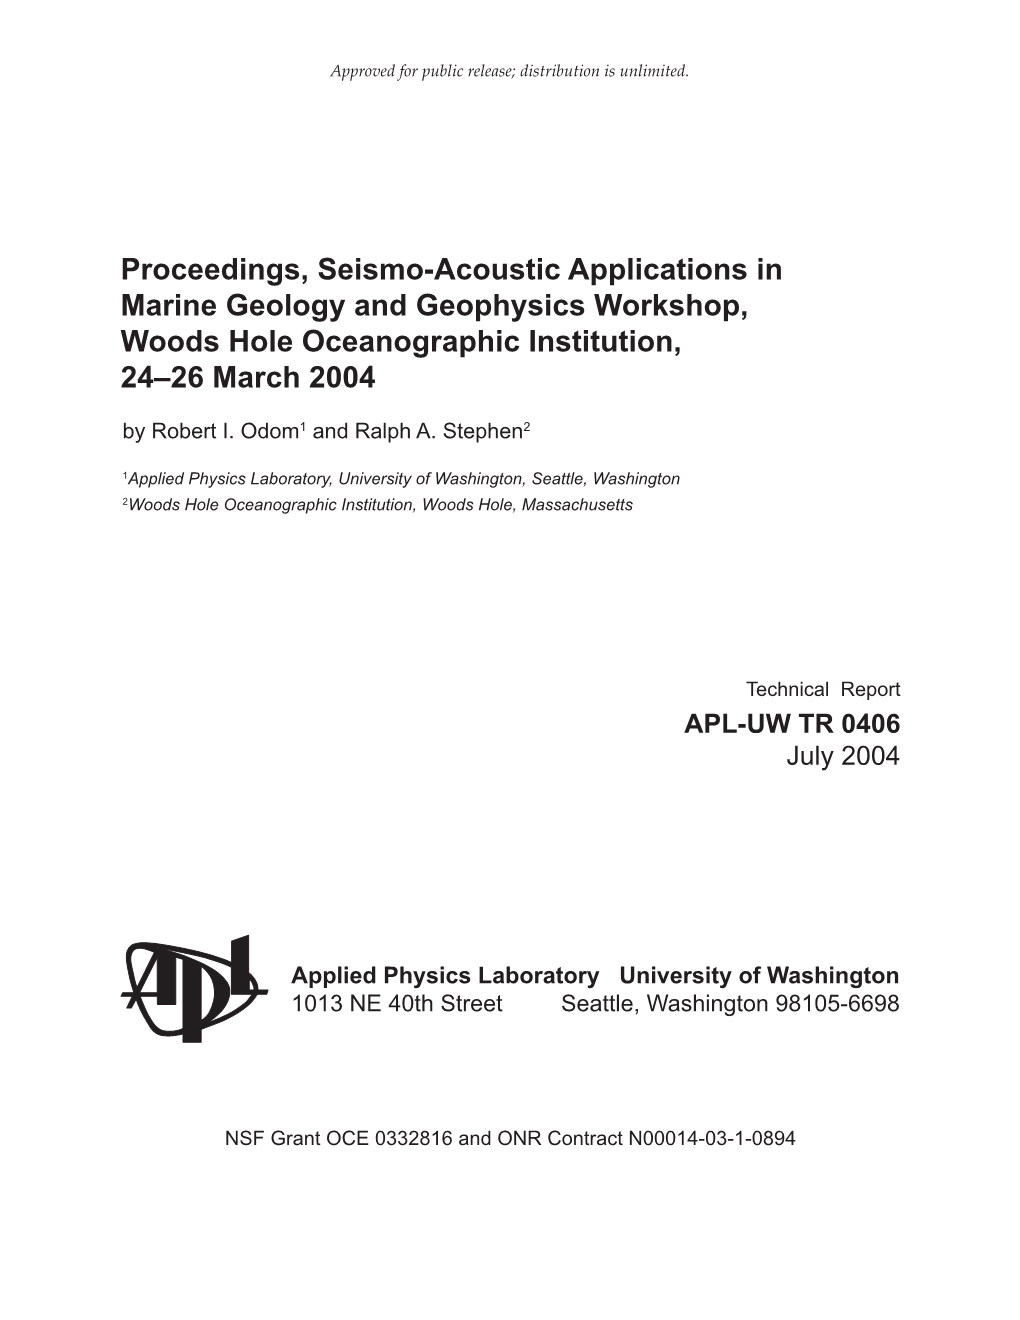 Proceedings, Seismo-Acoustic Applications in Marine Geology and Geophysics Workshop, Woods Hole Oceanographic Institution, 24–26 March 2004 by Robert I